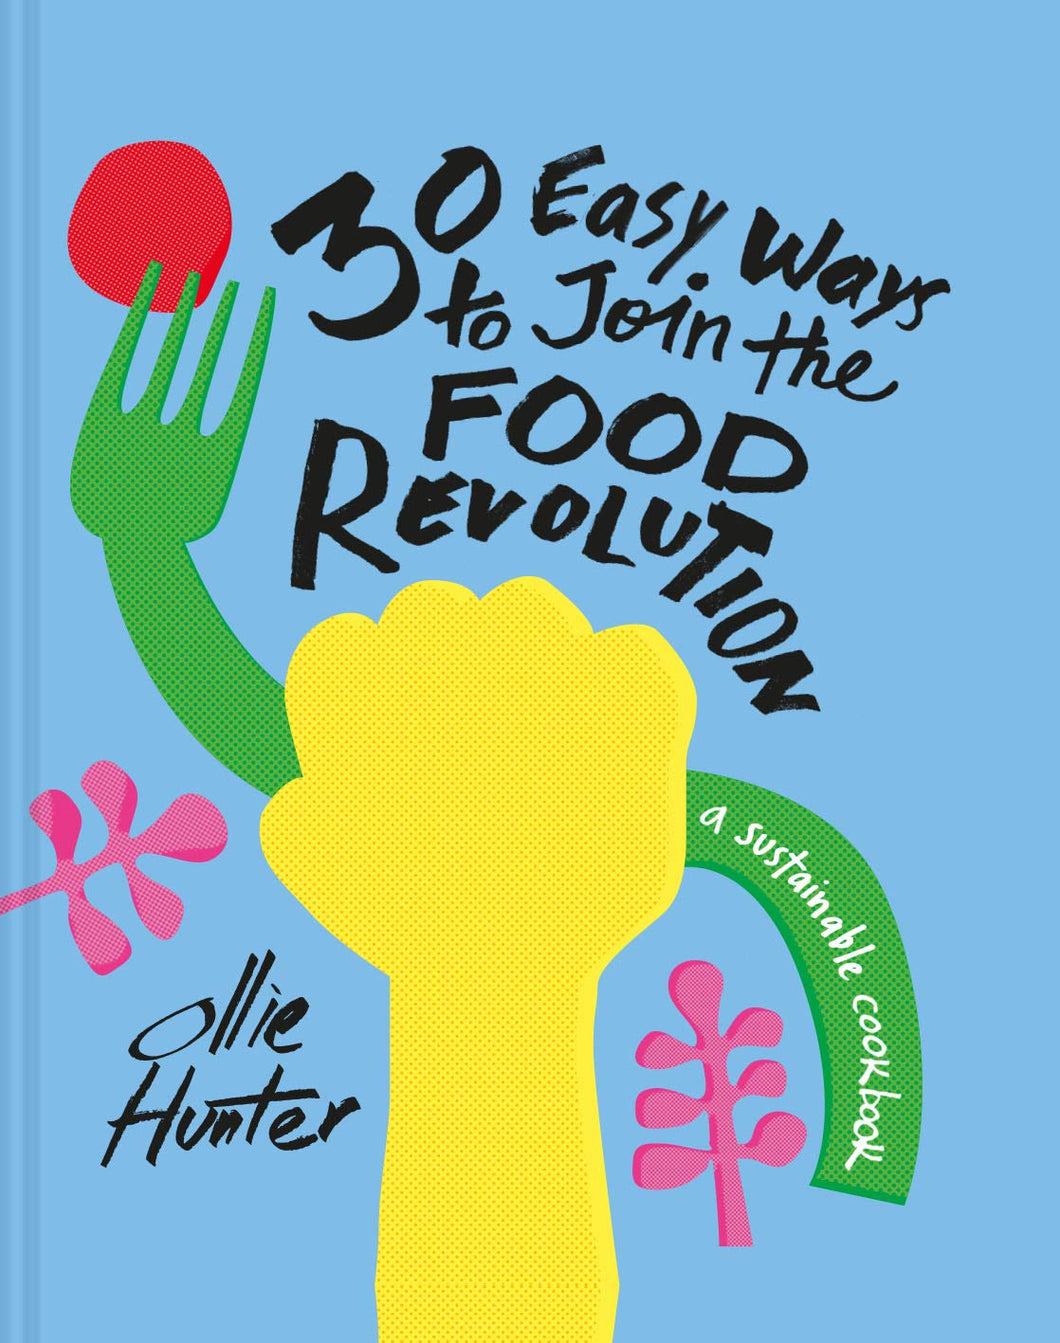 Blue cover of the cookbook features a yellow hand holding onto a green fork with a red circle. The tagline reads 